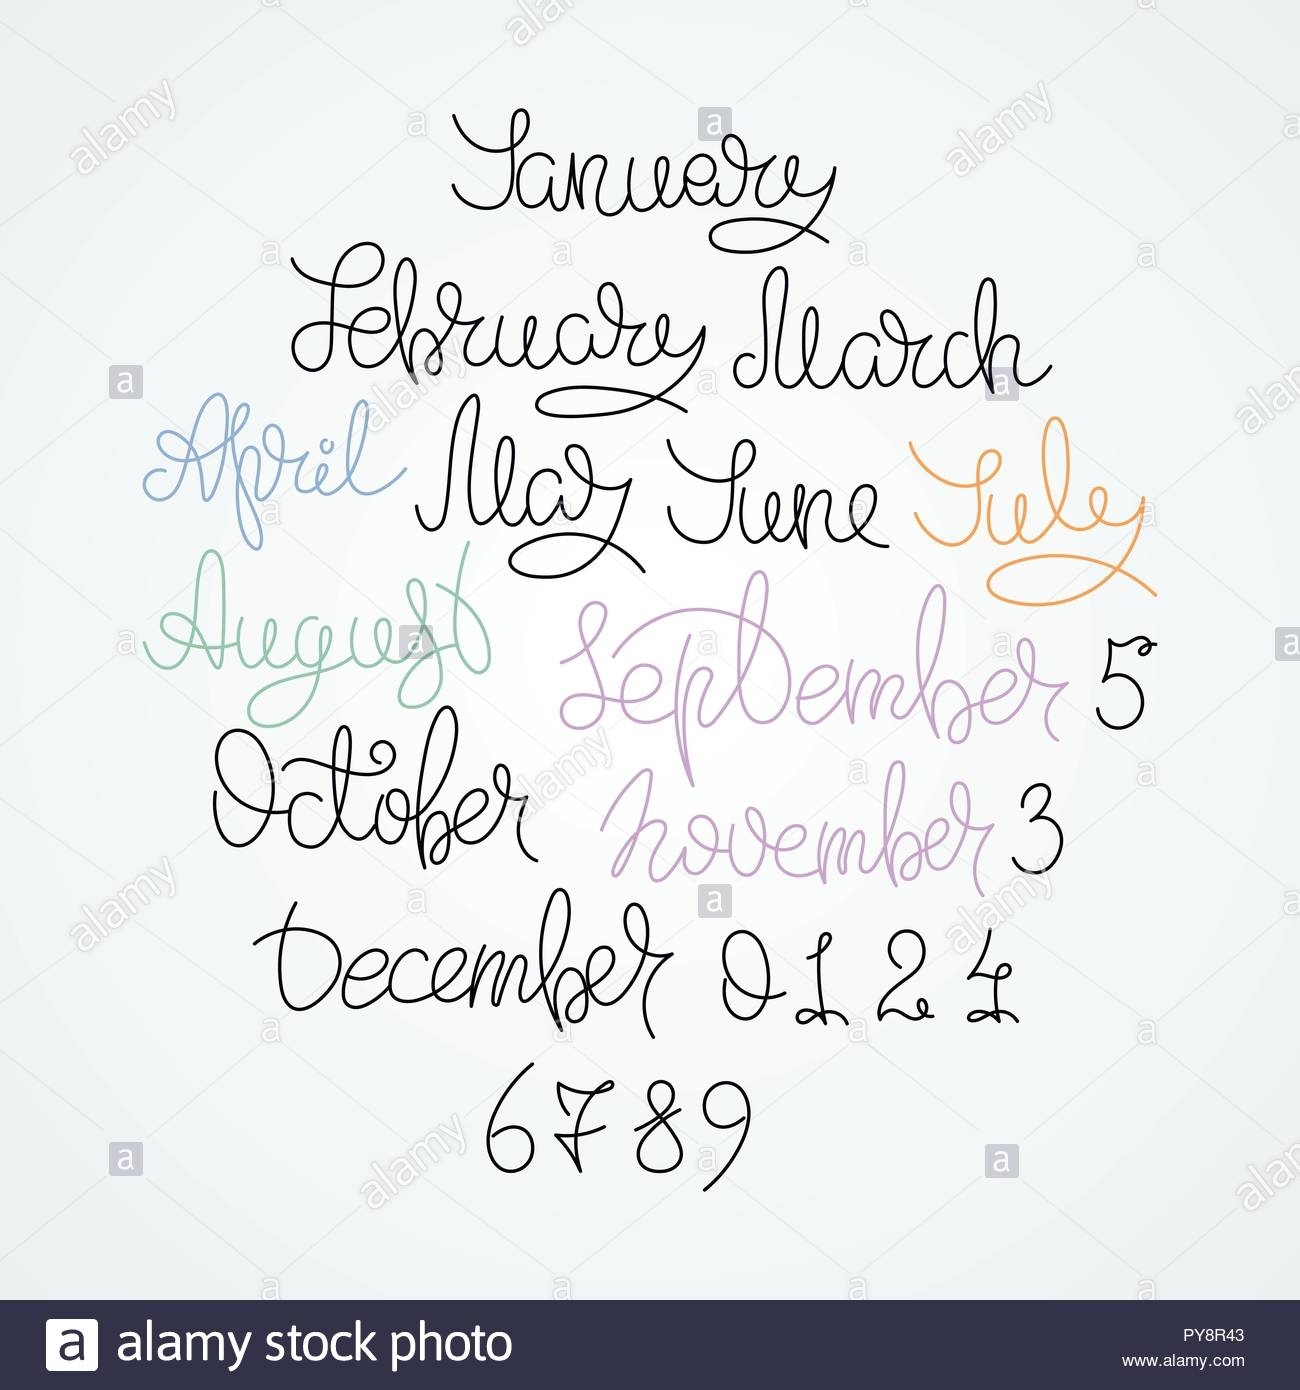 Calendar Collection Of Months And Numbers For All Year, Week with regard to Calendar With The Months Number